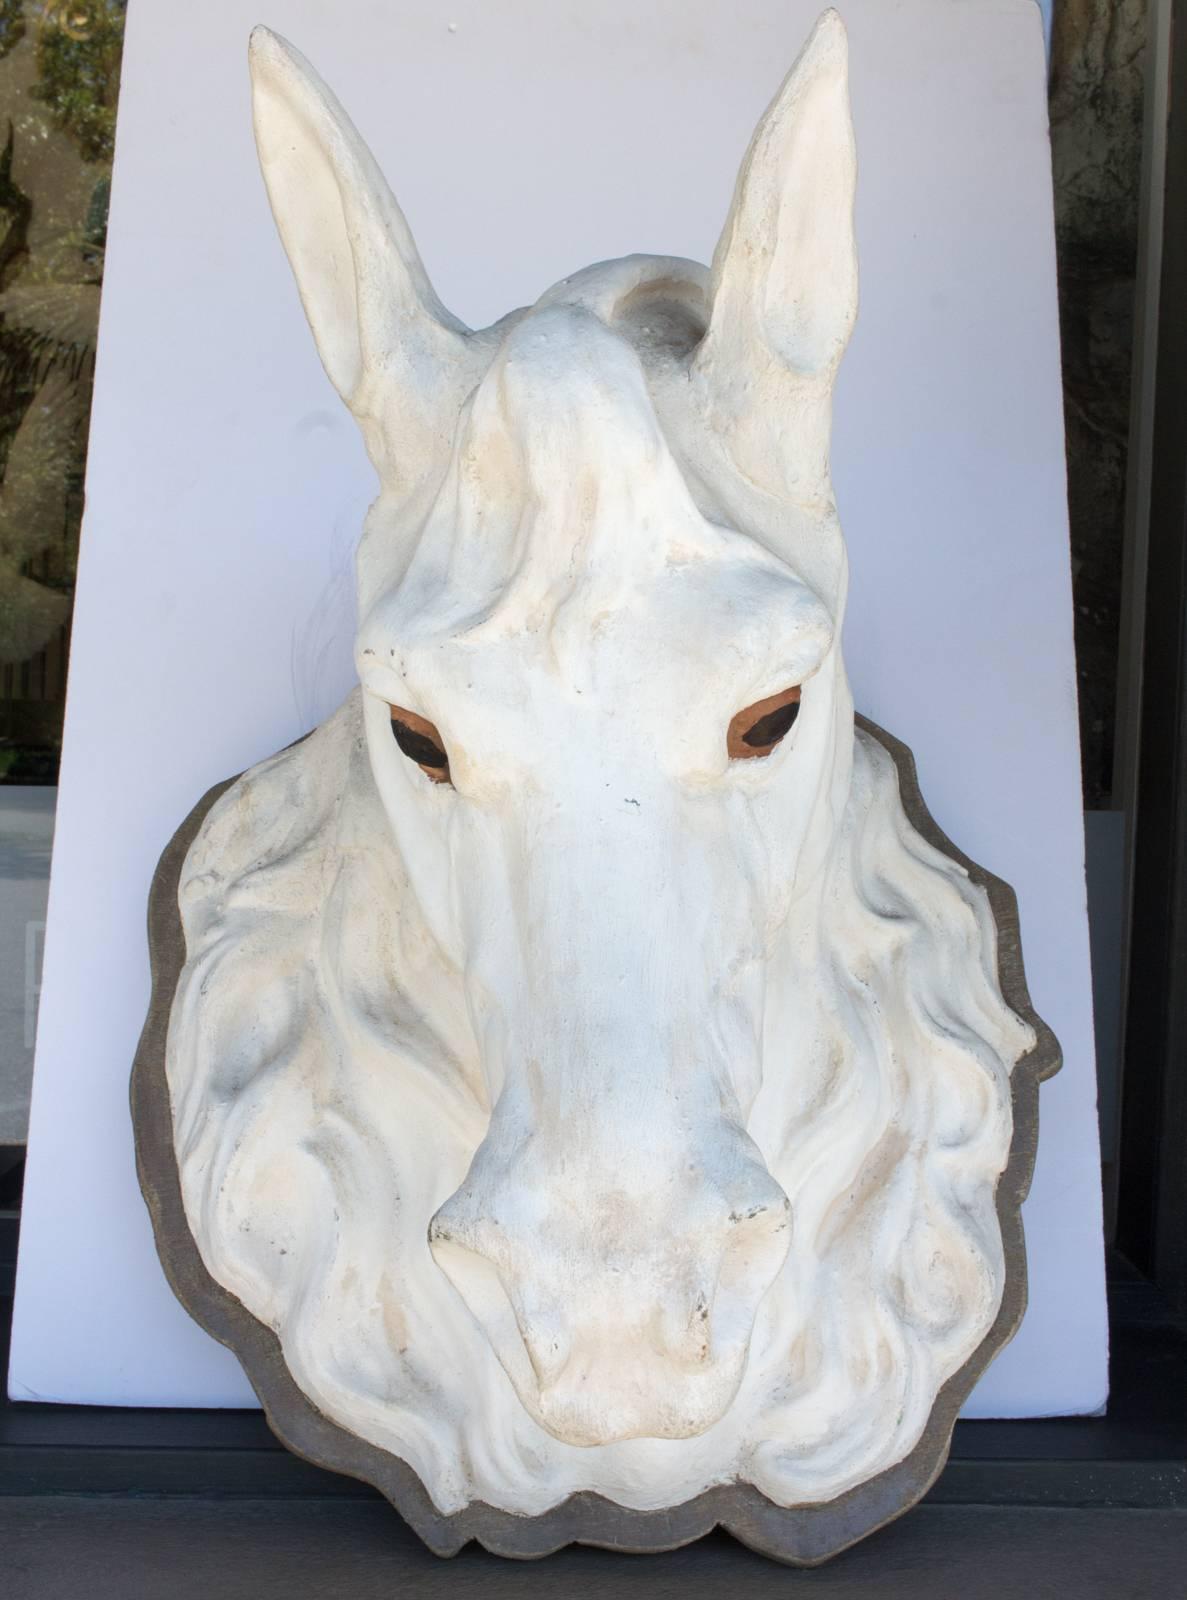 This 19th century trade sign in the shape of a horse head is handcrafted in zinc and painted white and once hung in a Parisian atelier. The eyes are a wonderful amber color and this piece is mounted onto a wood plaque. Uncovered in Paris, France,